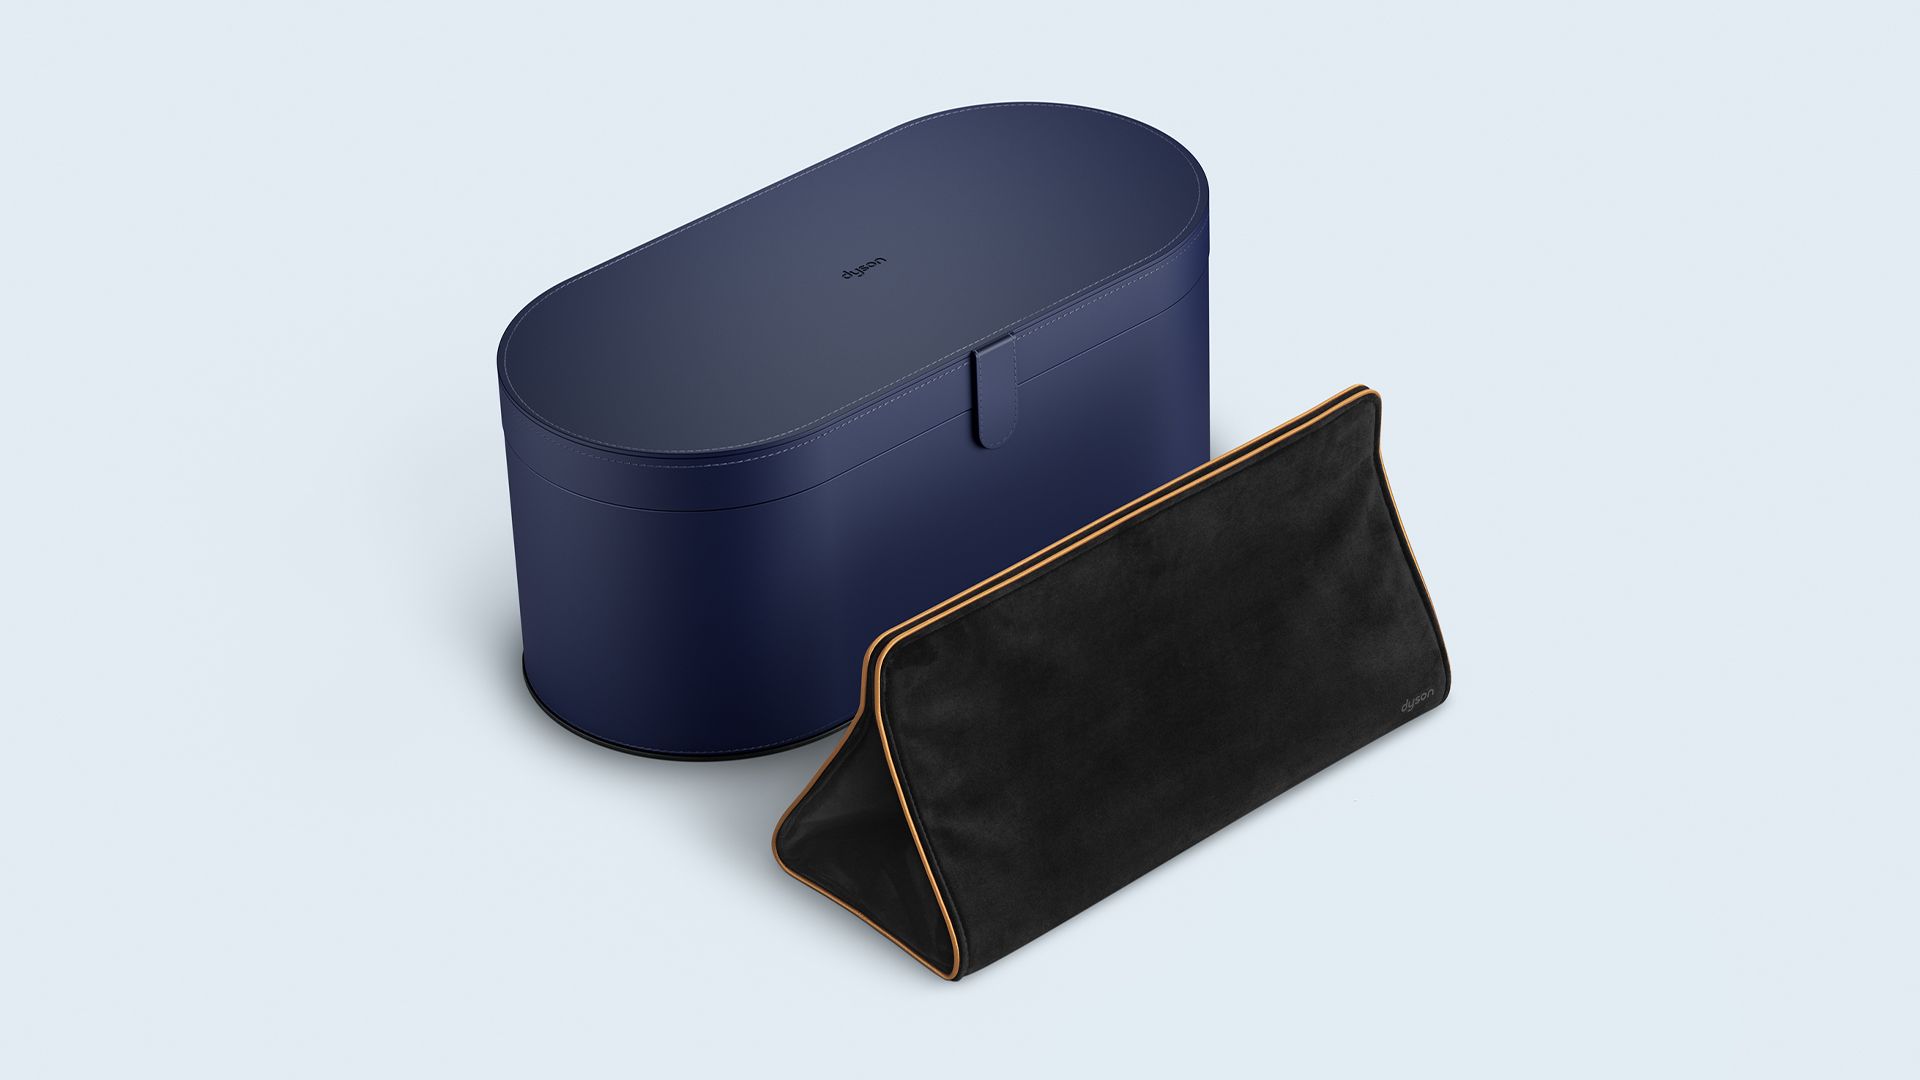 Dyson-designed presentation case and travel pouch